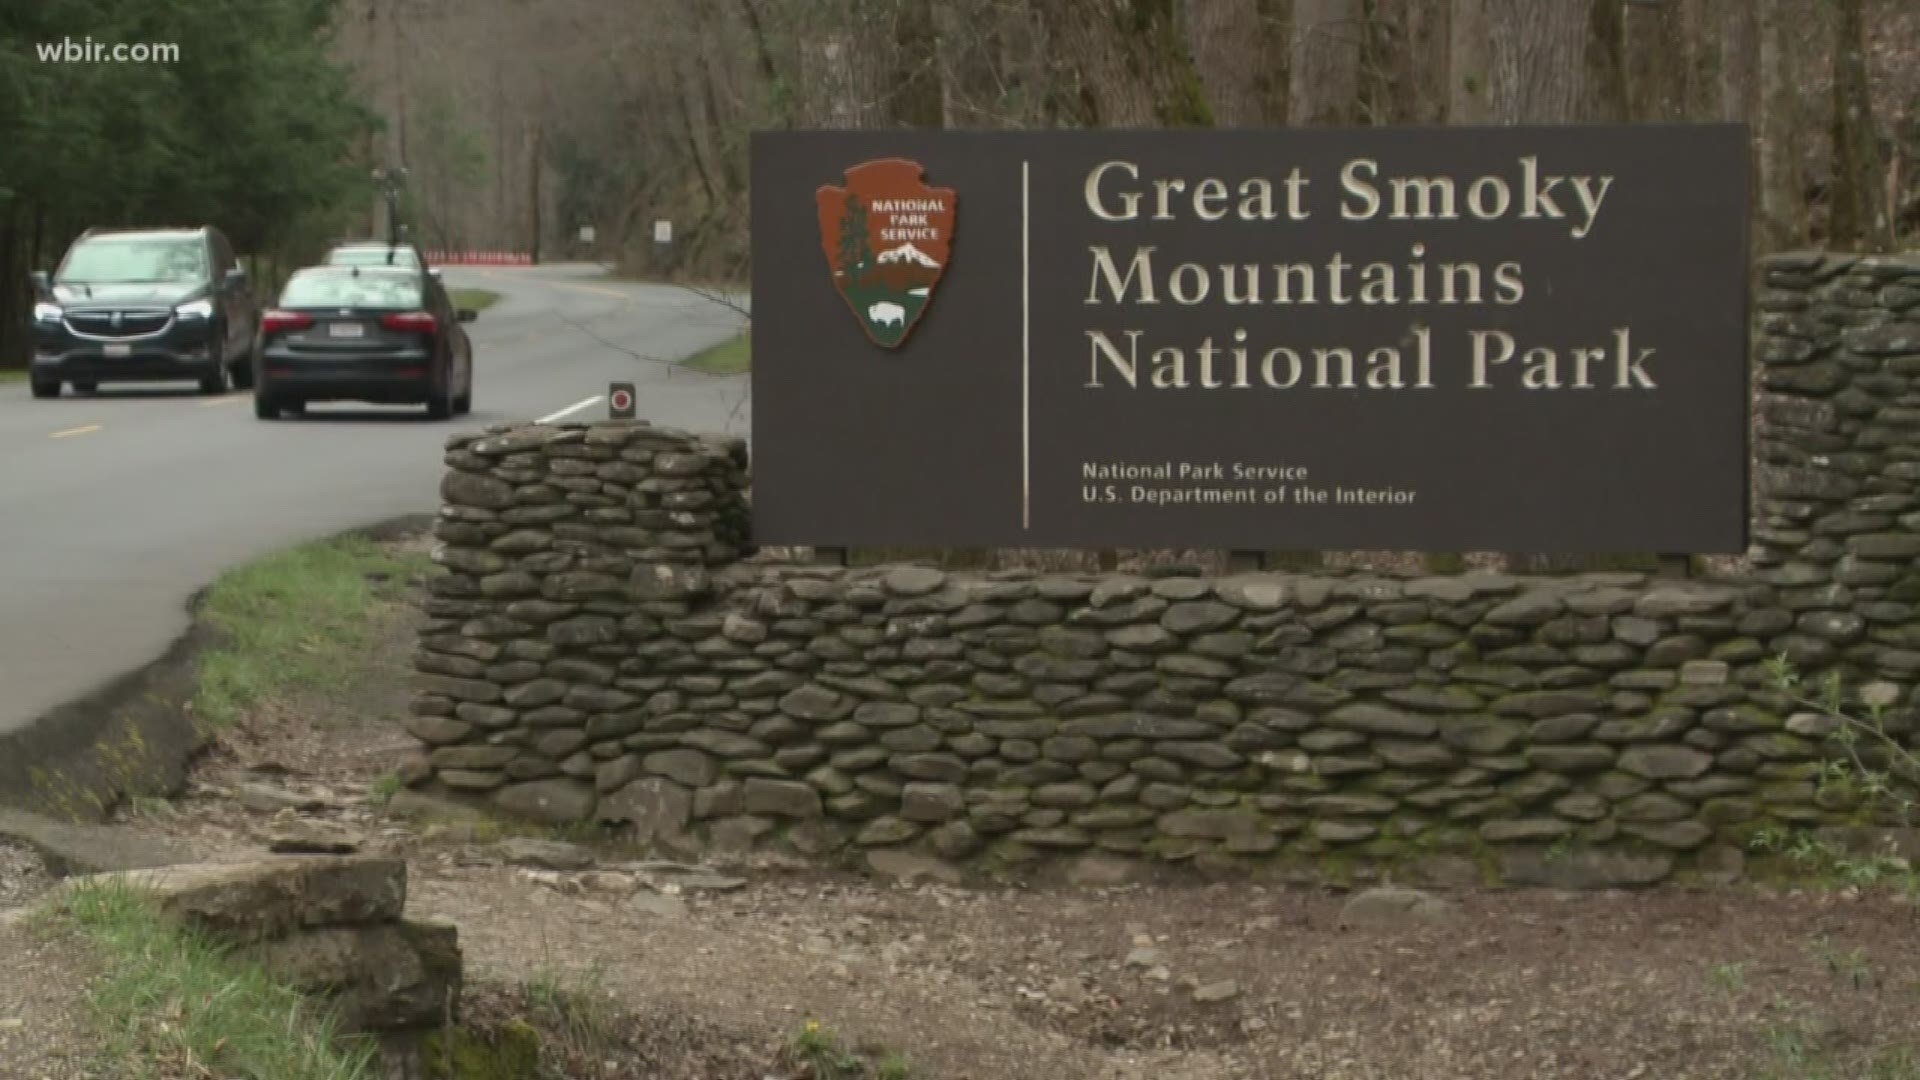 The Great Smoky Mountains are closing for the first time in history to prevent the spread of coronavirus.